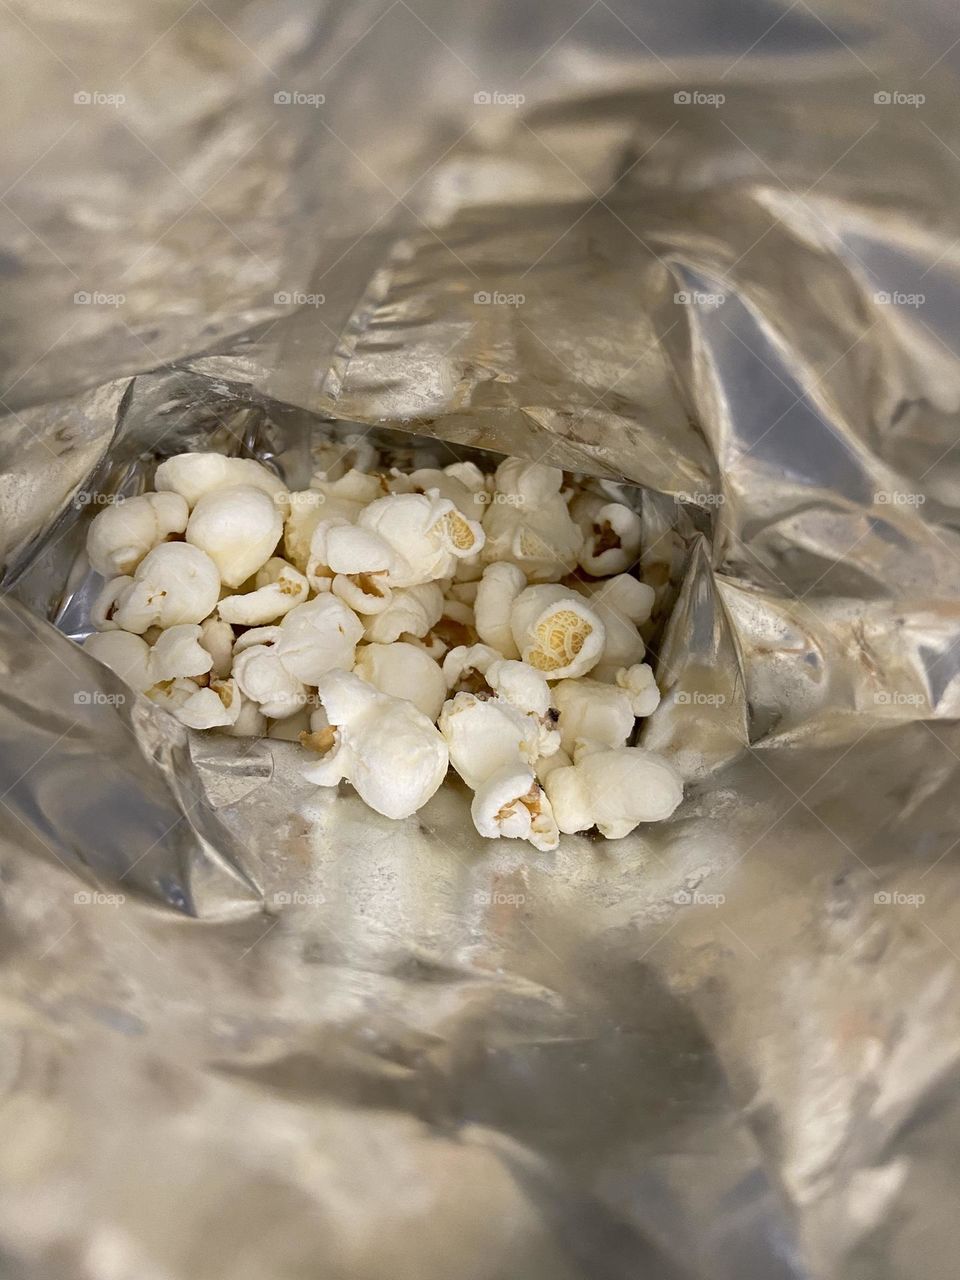 The last of the popcorn! A photo of the inside of a bag of Smart Foods White Cheddar popcorn as I sadly approached the end of the bag. 